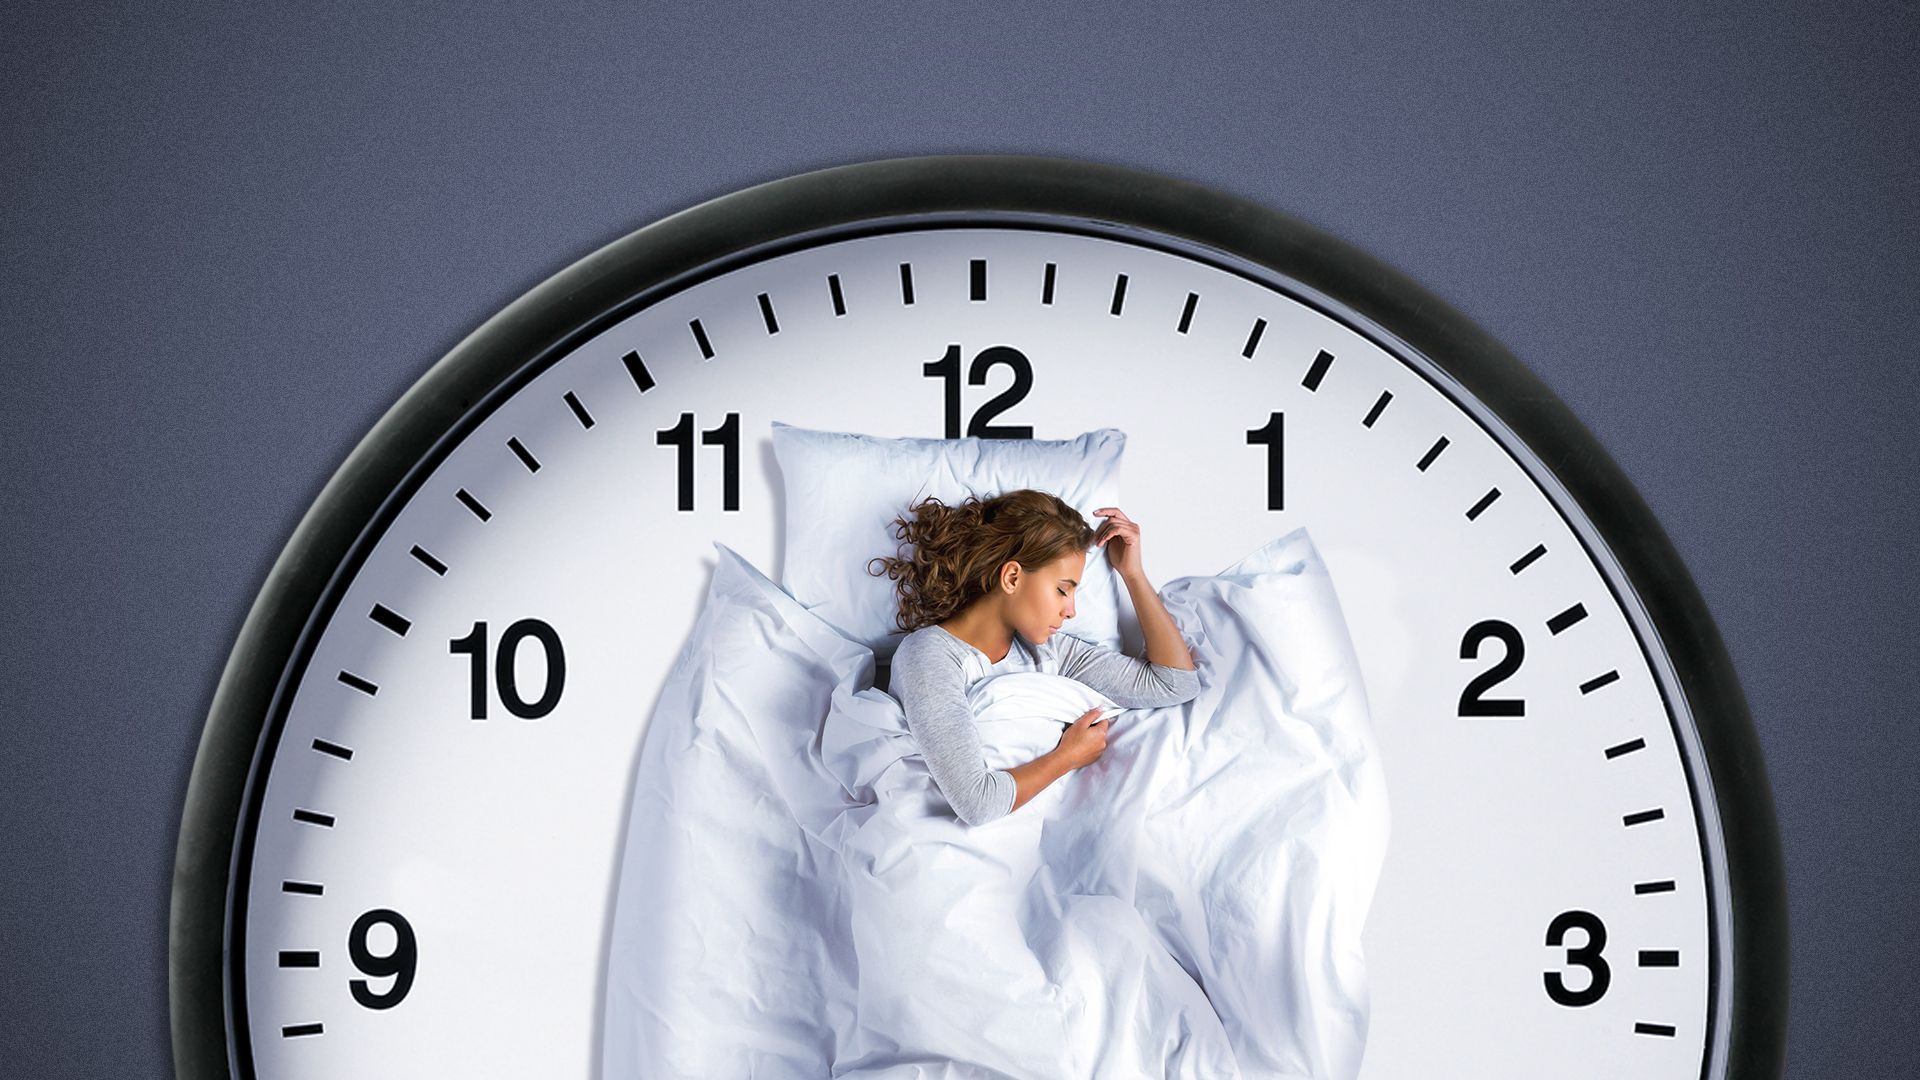 Illustration of a person fast asleep on top of a clock with no hands. 